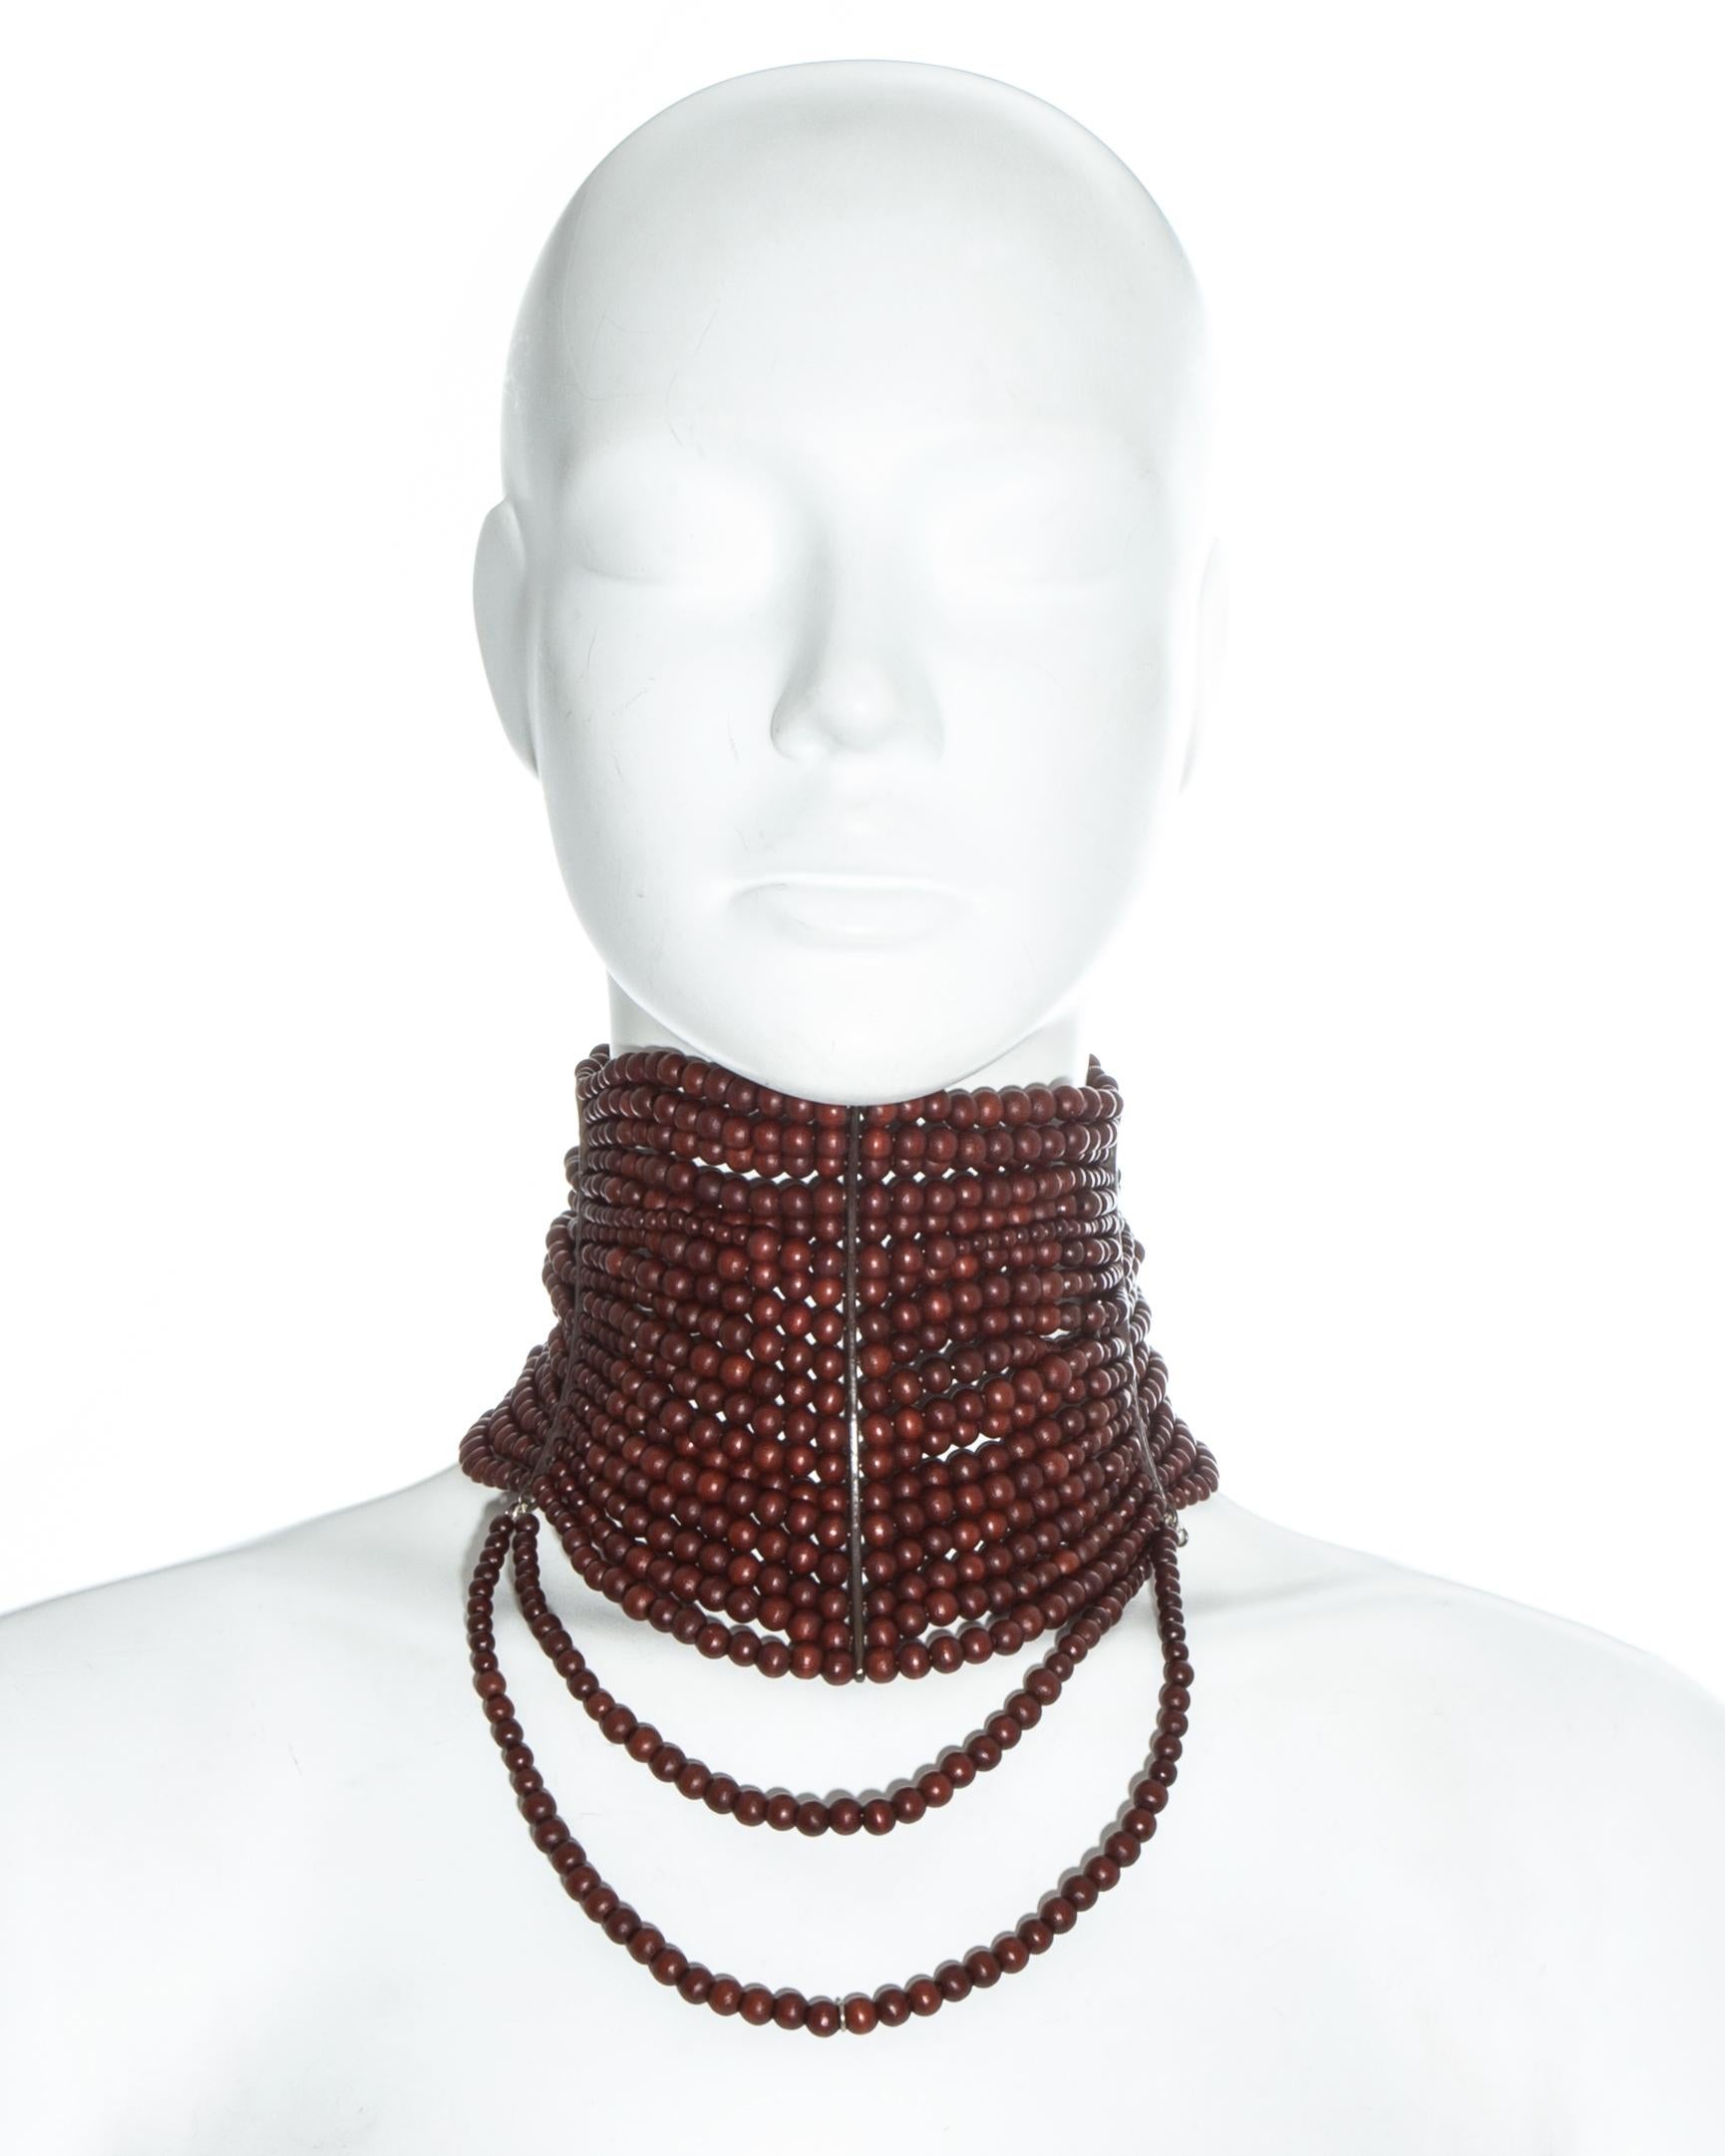 Christian Dior by John Galliano; Eighteen strand 'Maasai' choker necklace. Mahogany brown wooden beads, 3 curved metal horn shaped bands which sculpt the neck, chain fastening at the rear, and two hanging strands at the centre front.   

Fall-Winter